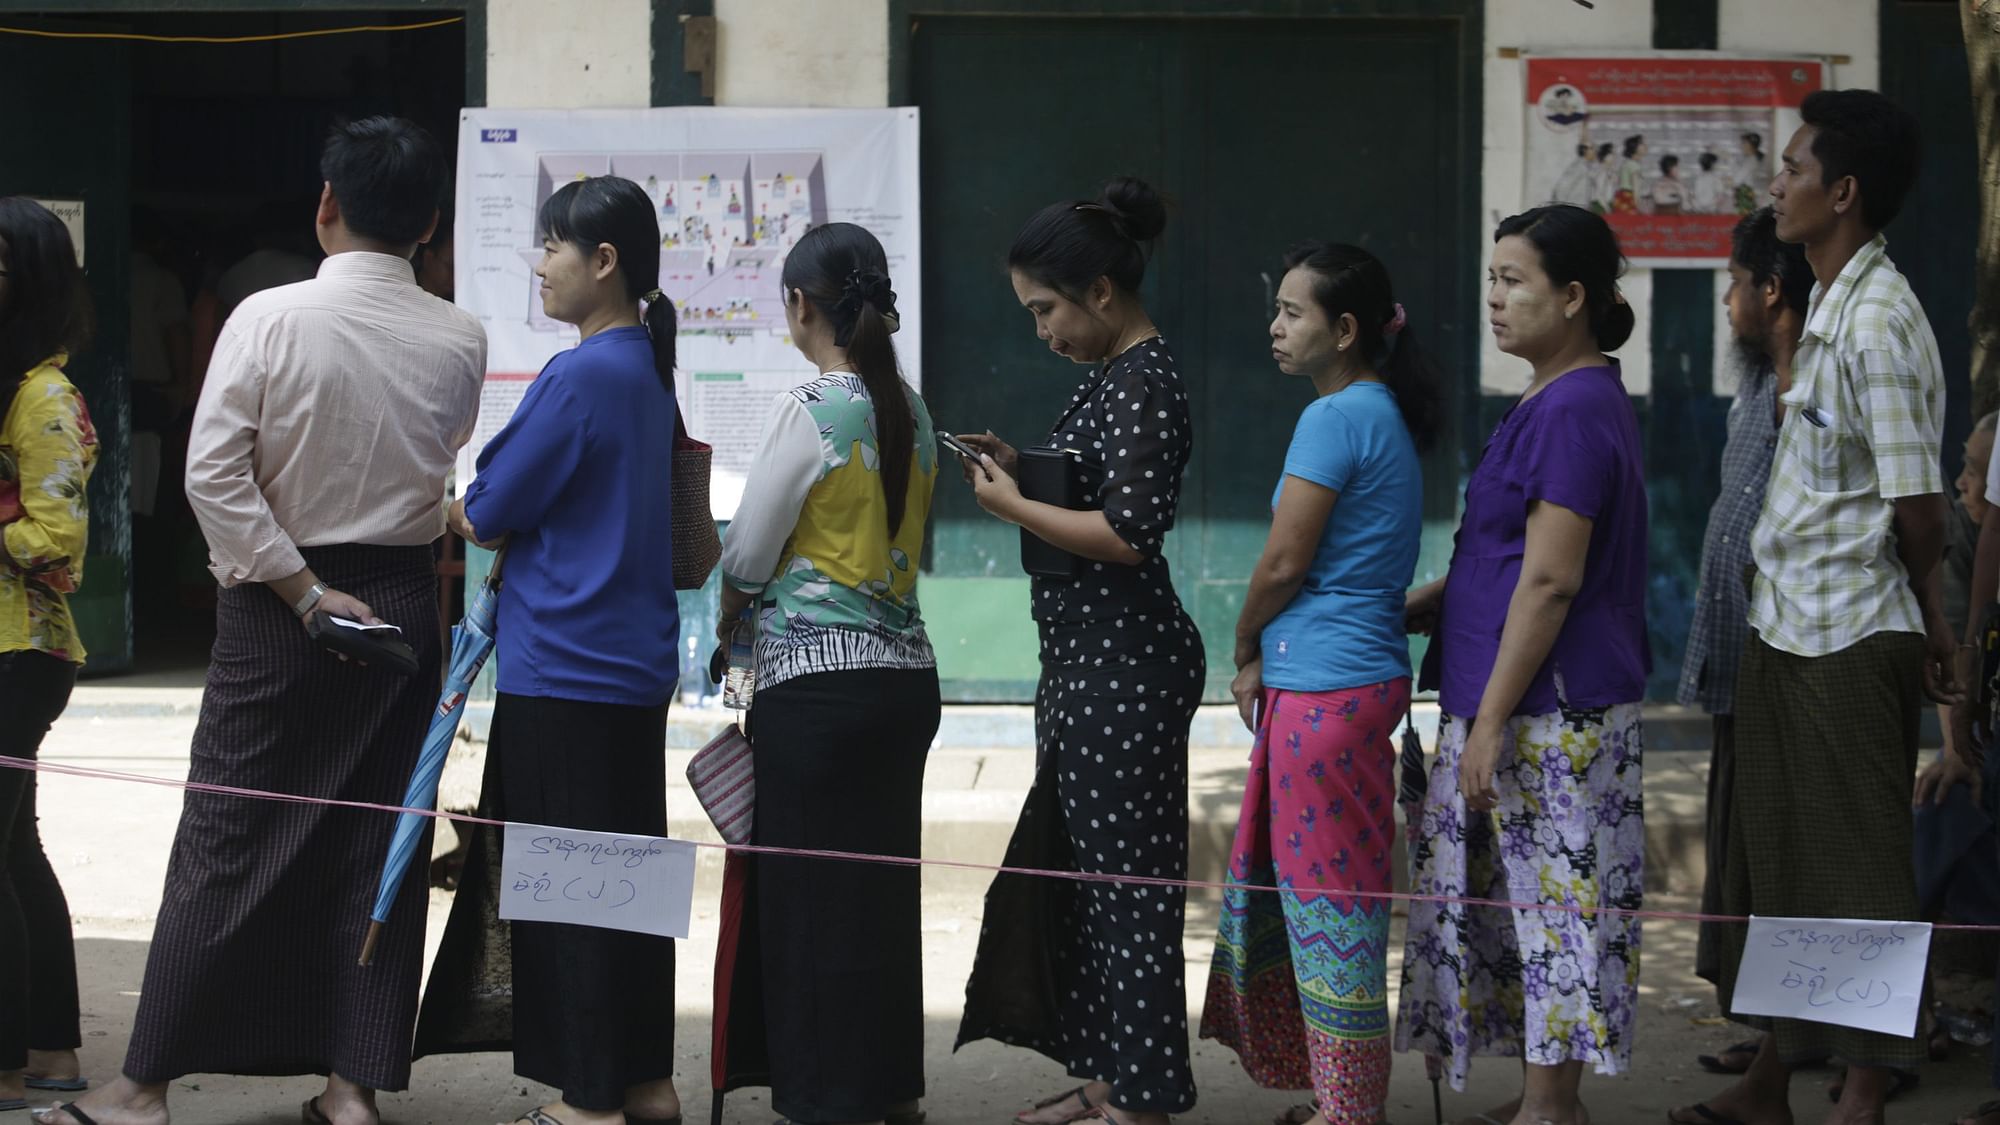 File photo. People queue to cast their votes at a polling station in Yangon, Myanmar, November 8, 2015.